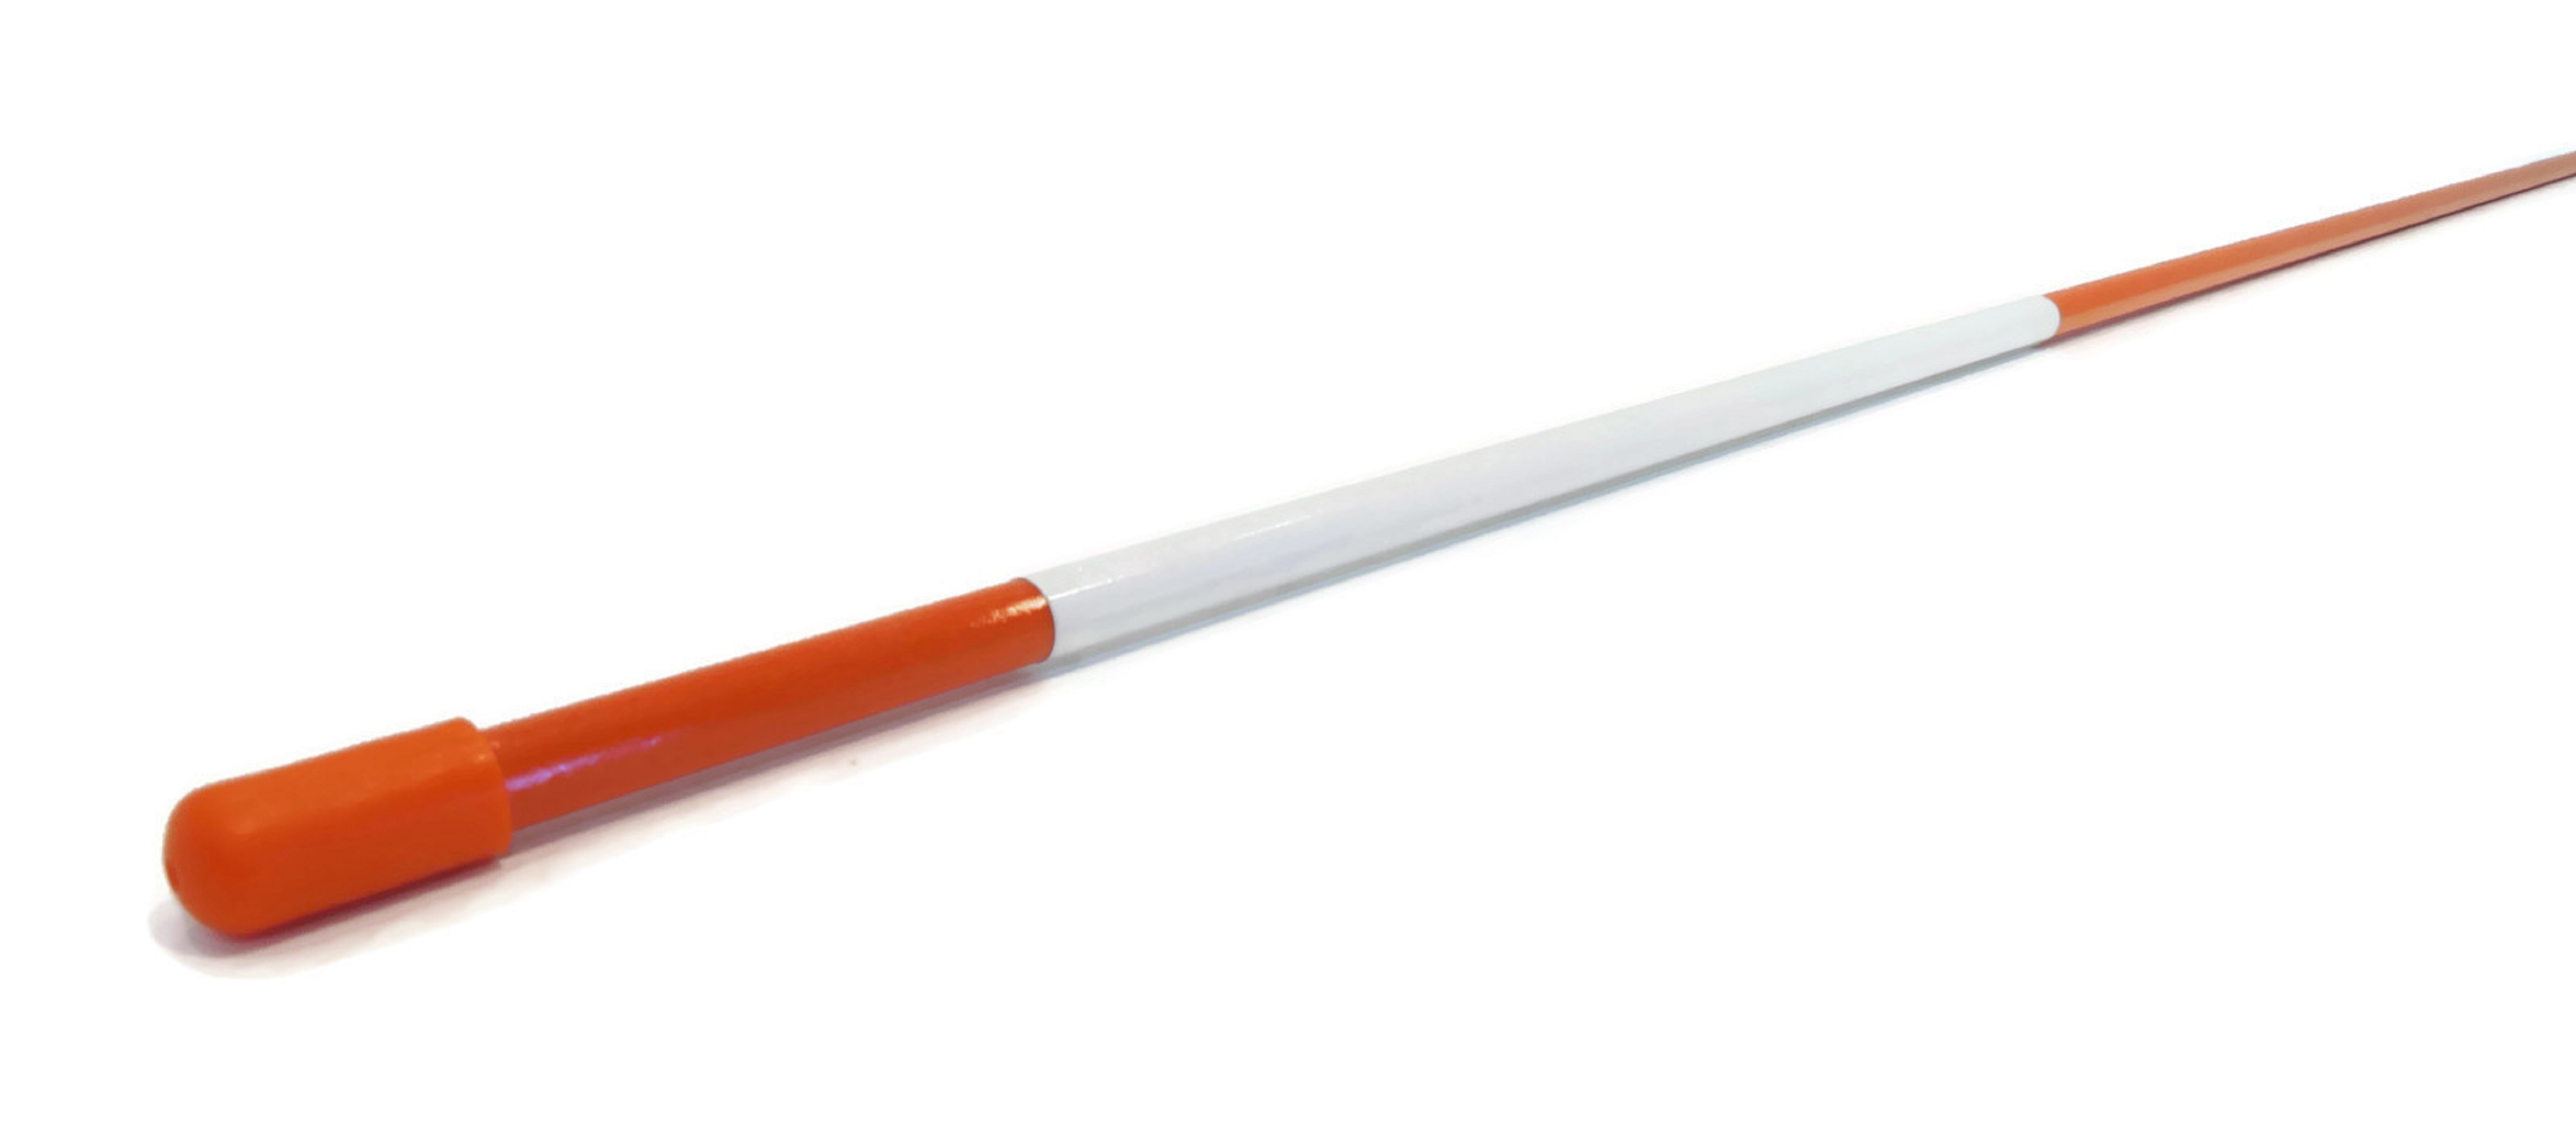 The ROP Shop | Pack of 15 Orange Pathway Sticks 48 inches, 1/4 inch for Lawn, Yard, & Grass Driveway - image 1 of 6